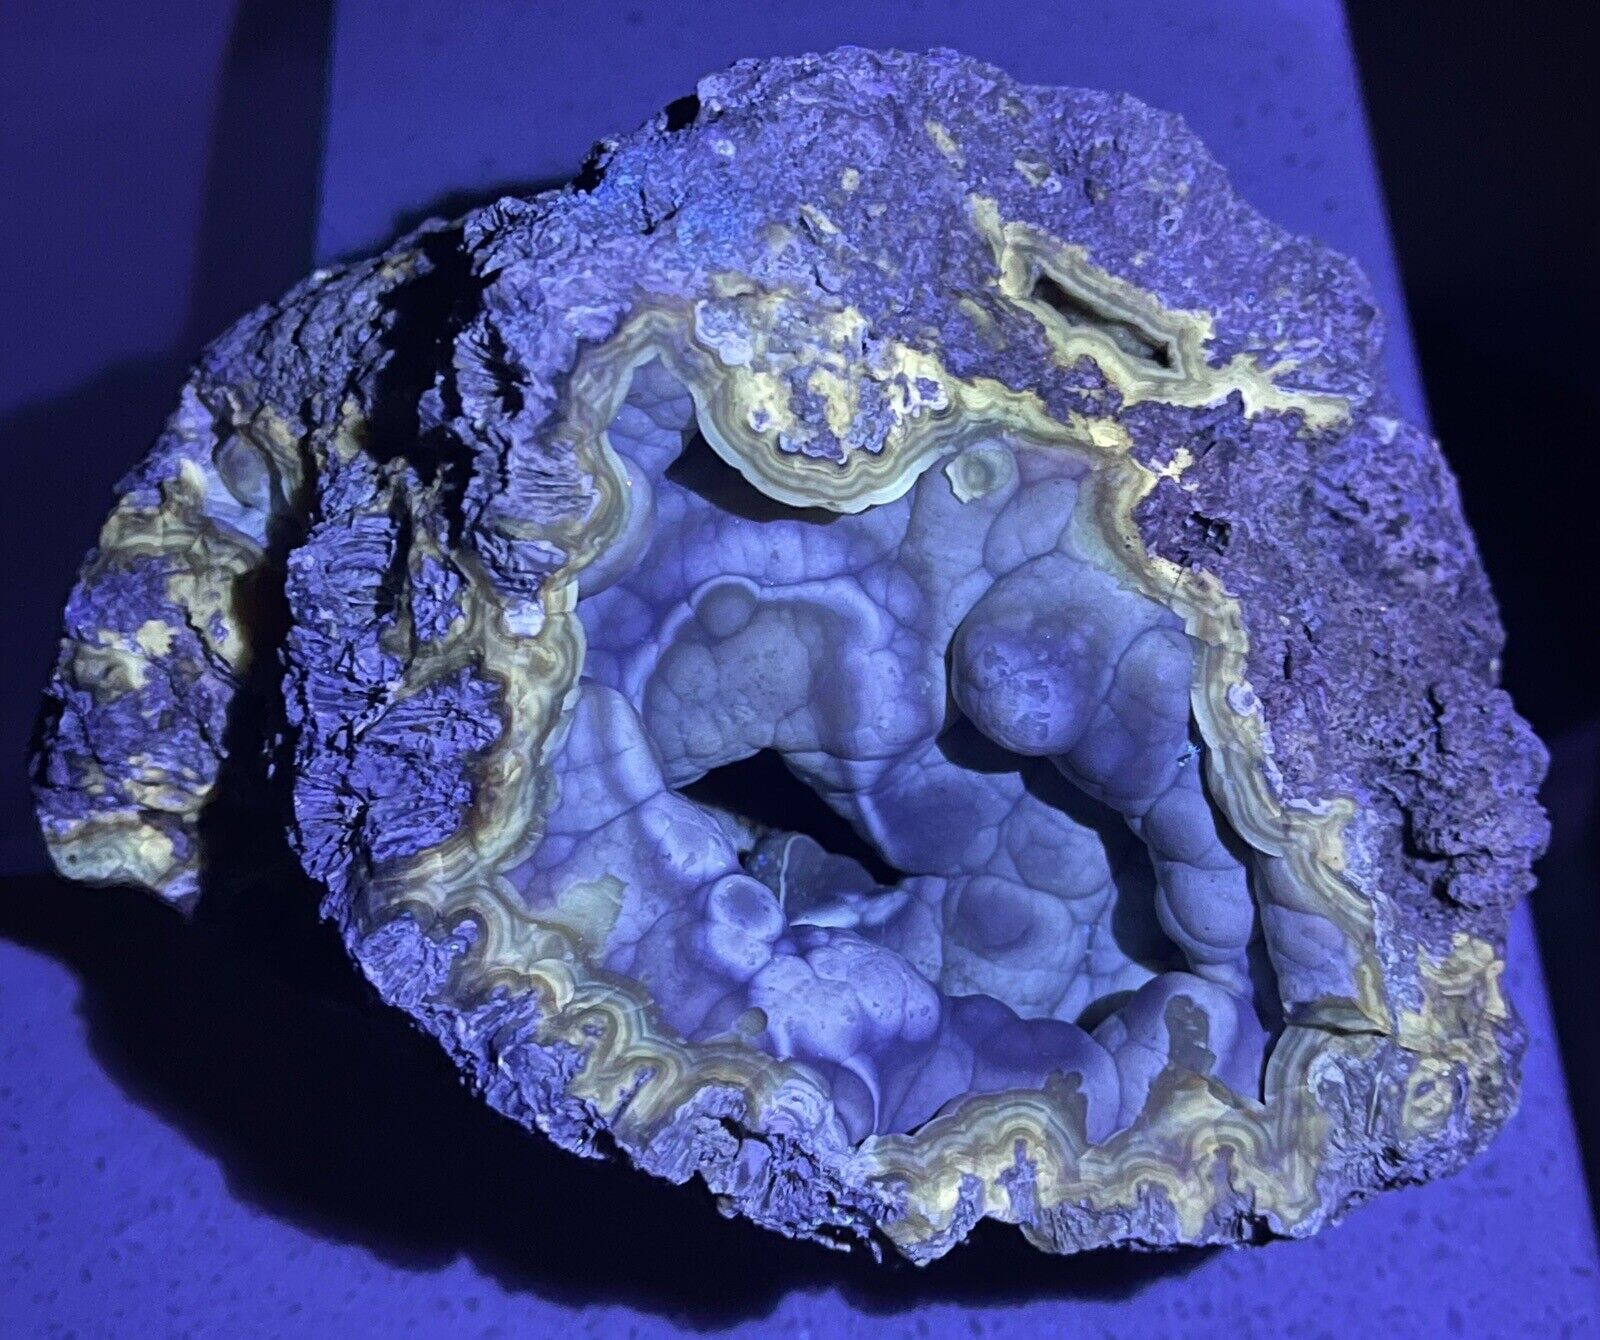 4lb+ Fluorescent Agatized Coral Fossil Geode Botryoidal Blue Agate Tampa Bay